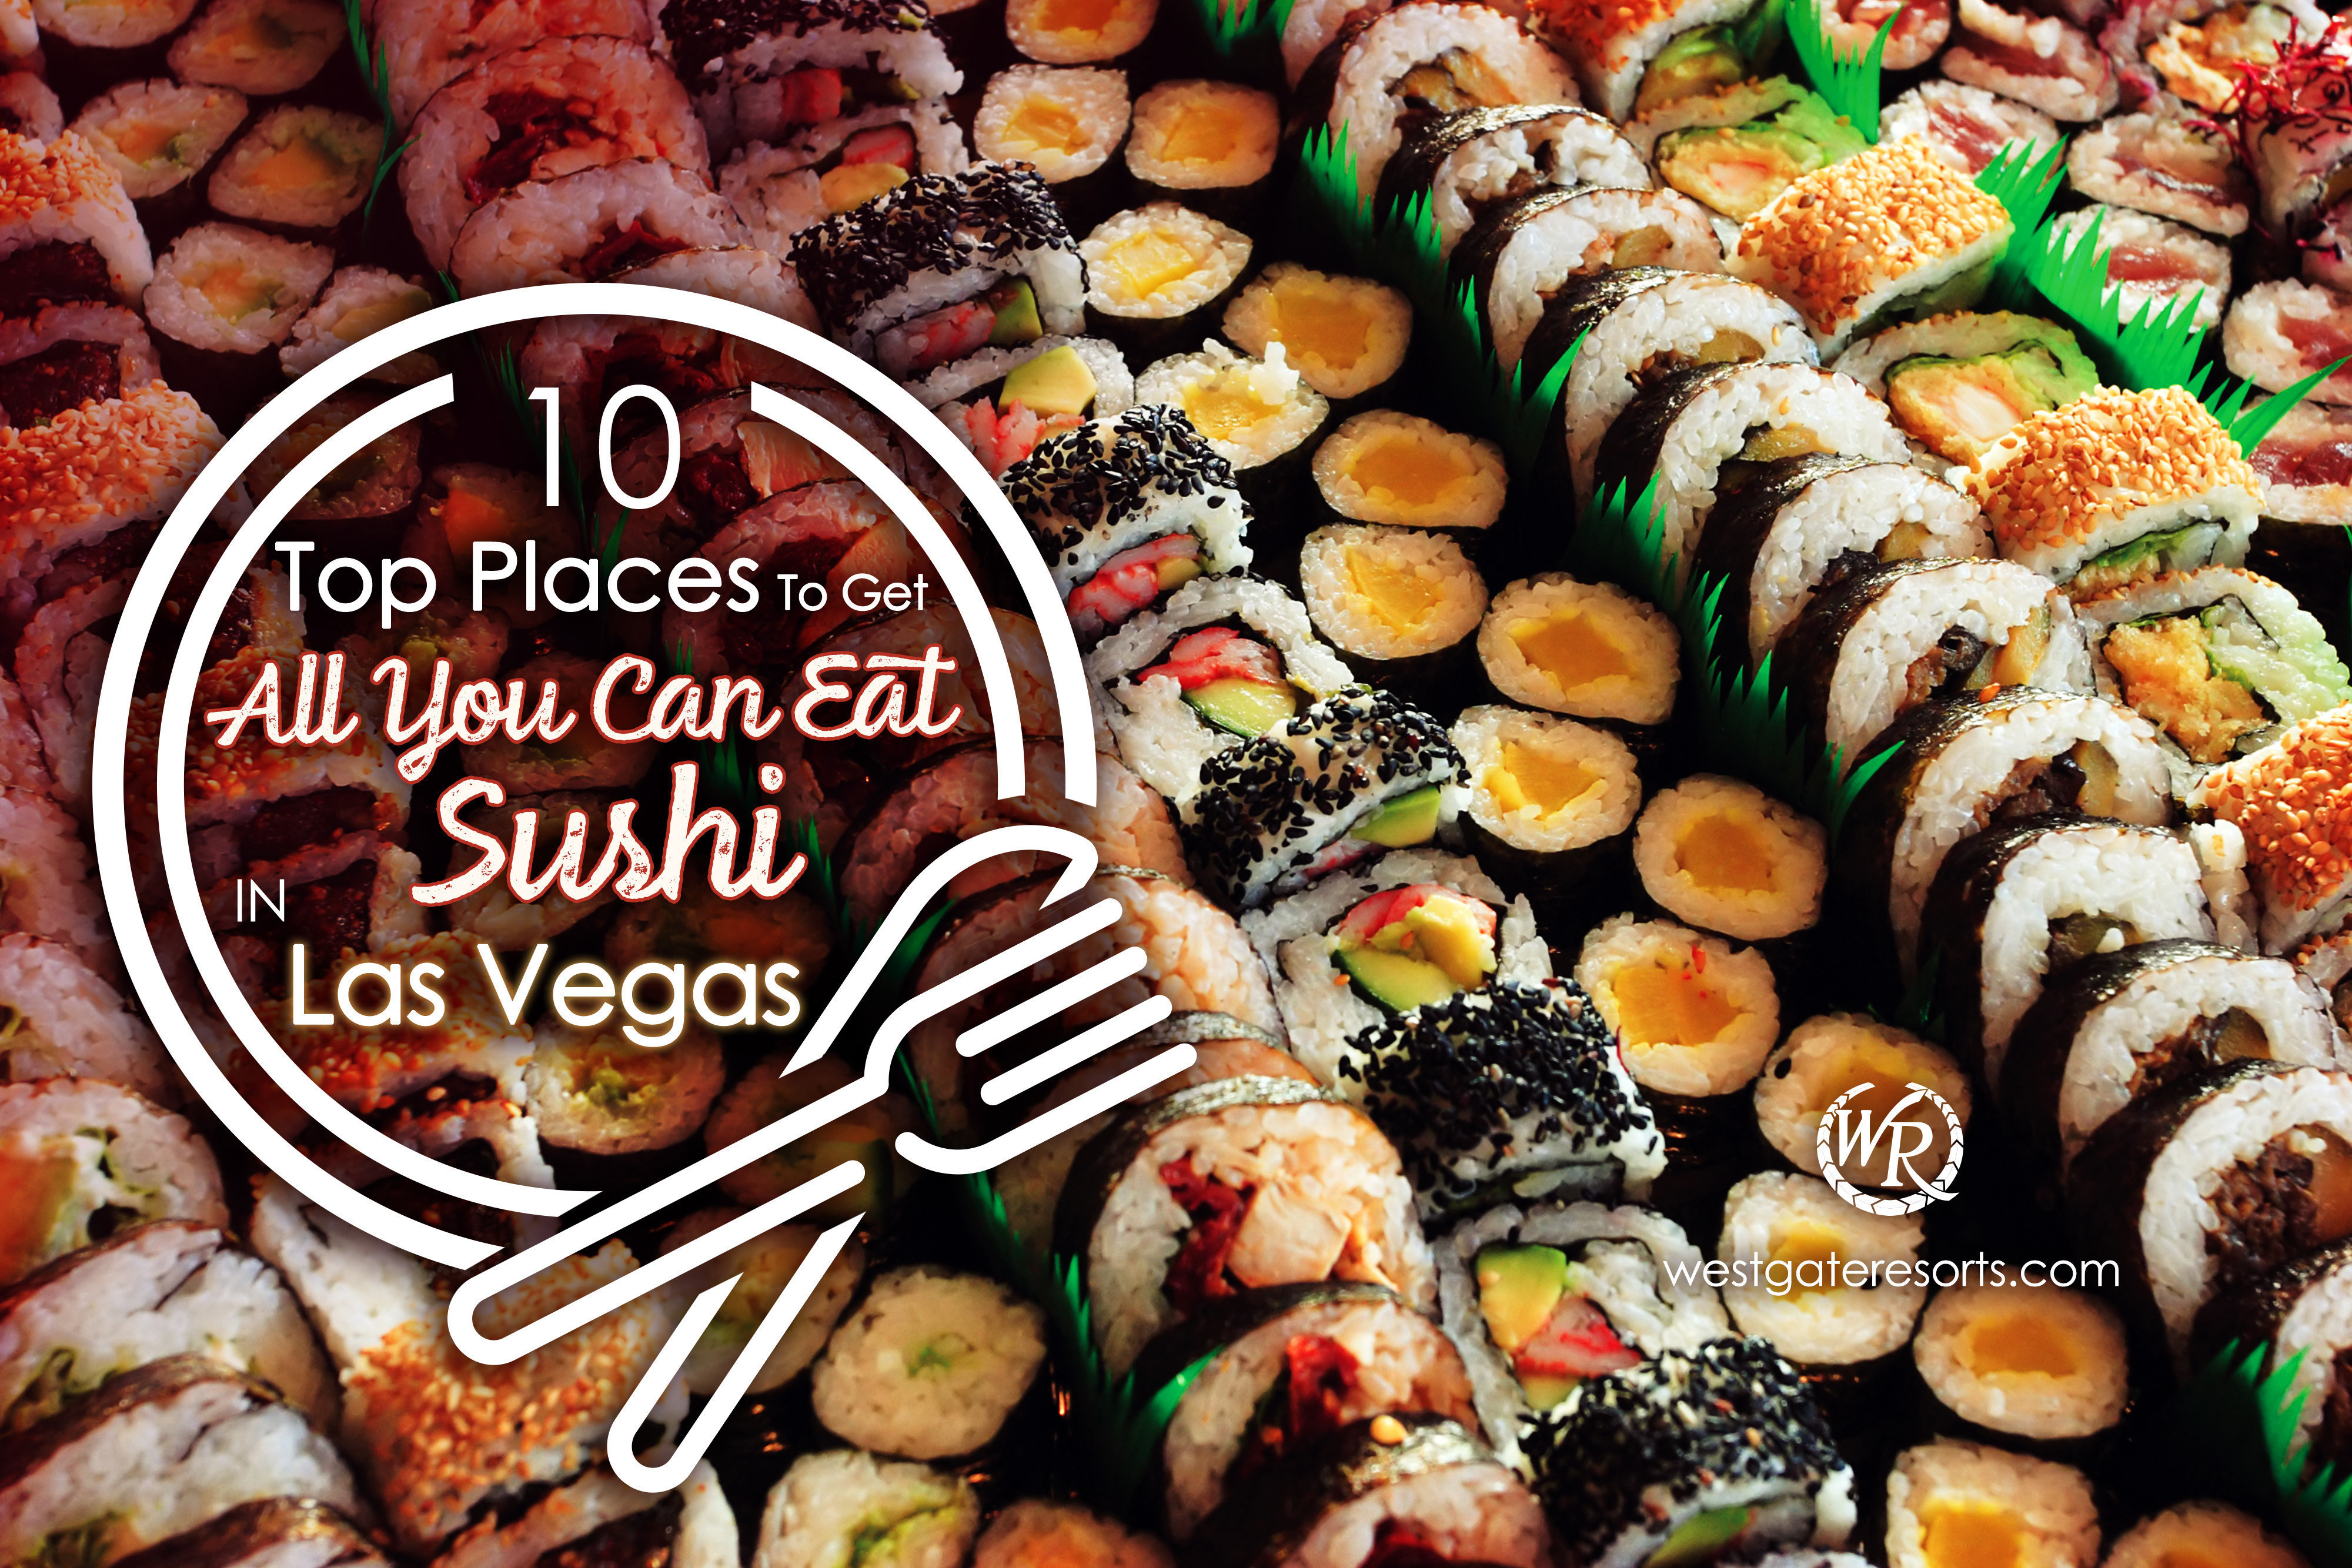 10 Top Places To Get All You Can Eat Sushi In Las Vegas